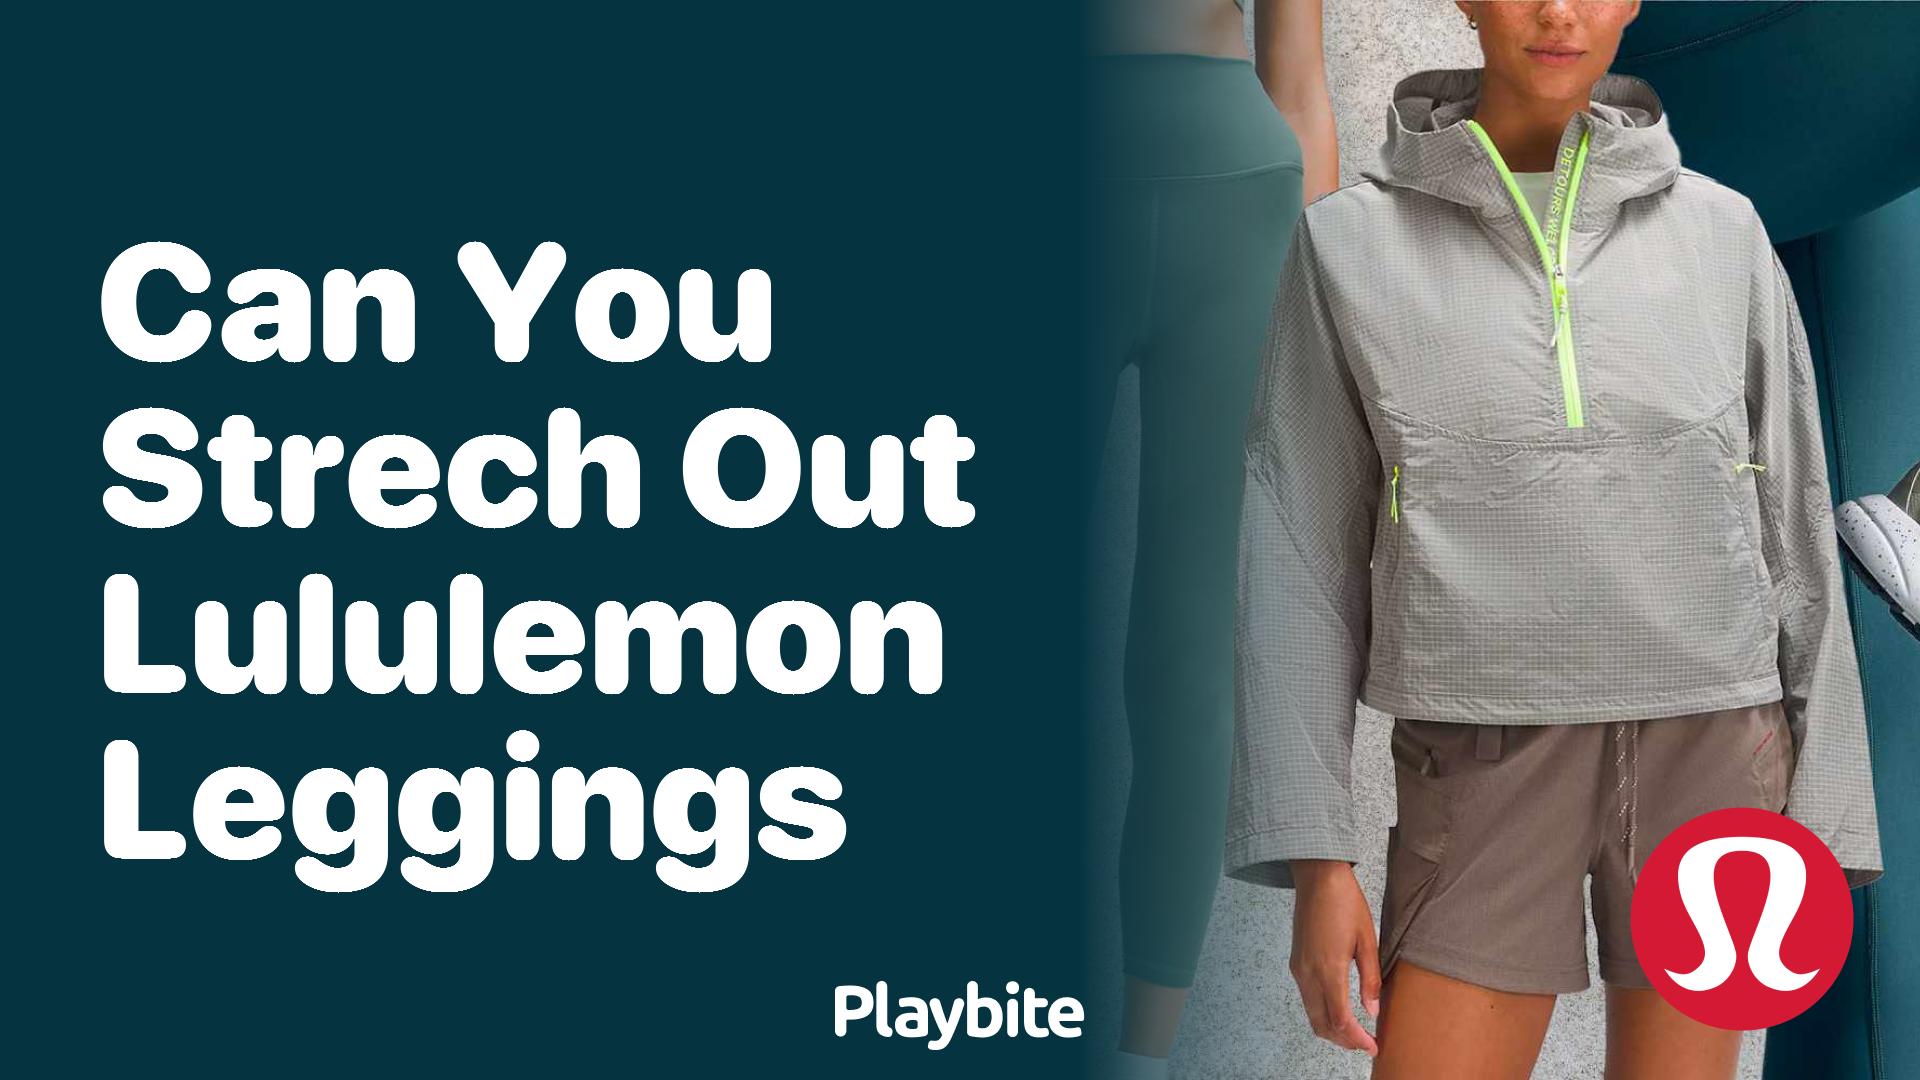 https://www.playbite.com/wp-content/uploads/sites/3/2024/03/can-you-strech-out-lululemon-leggings.png